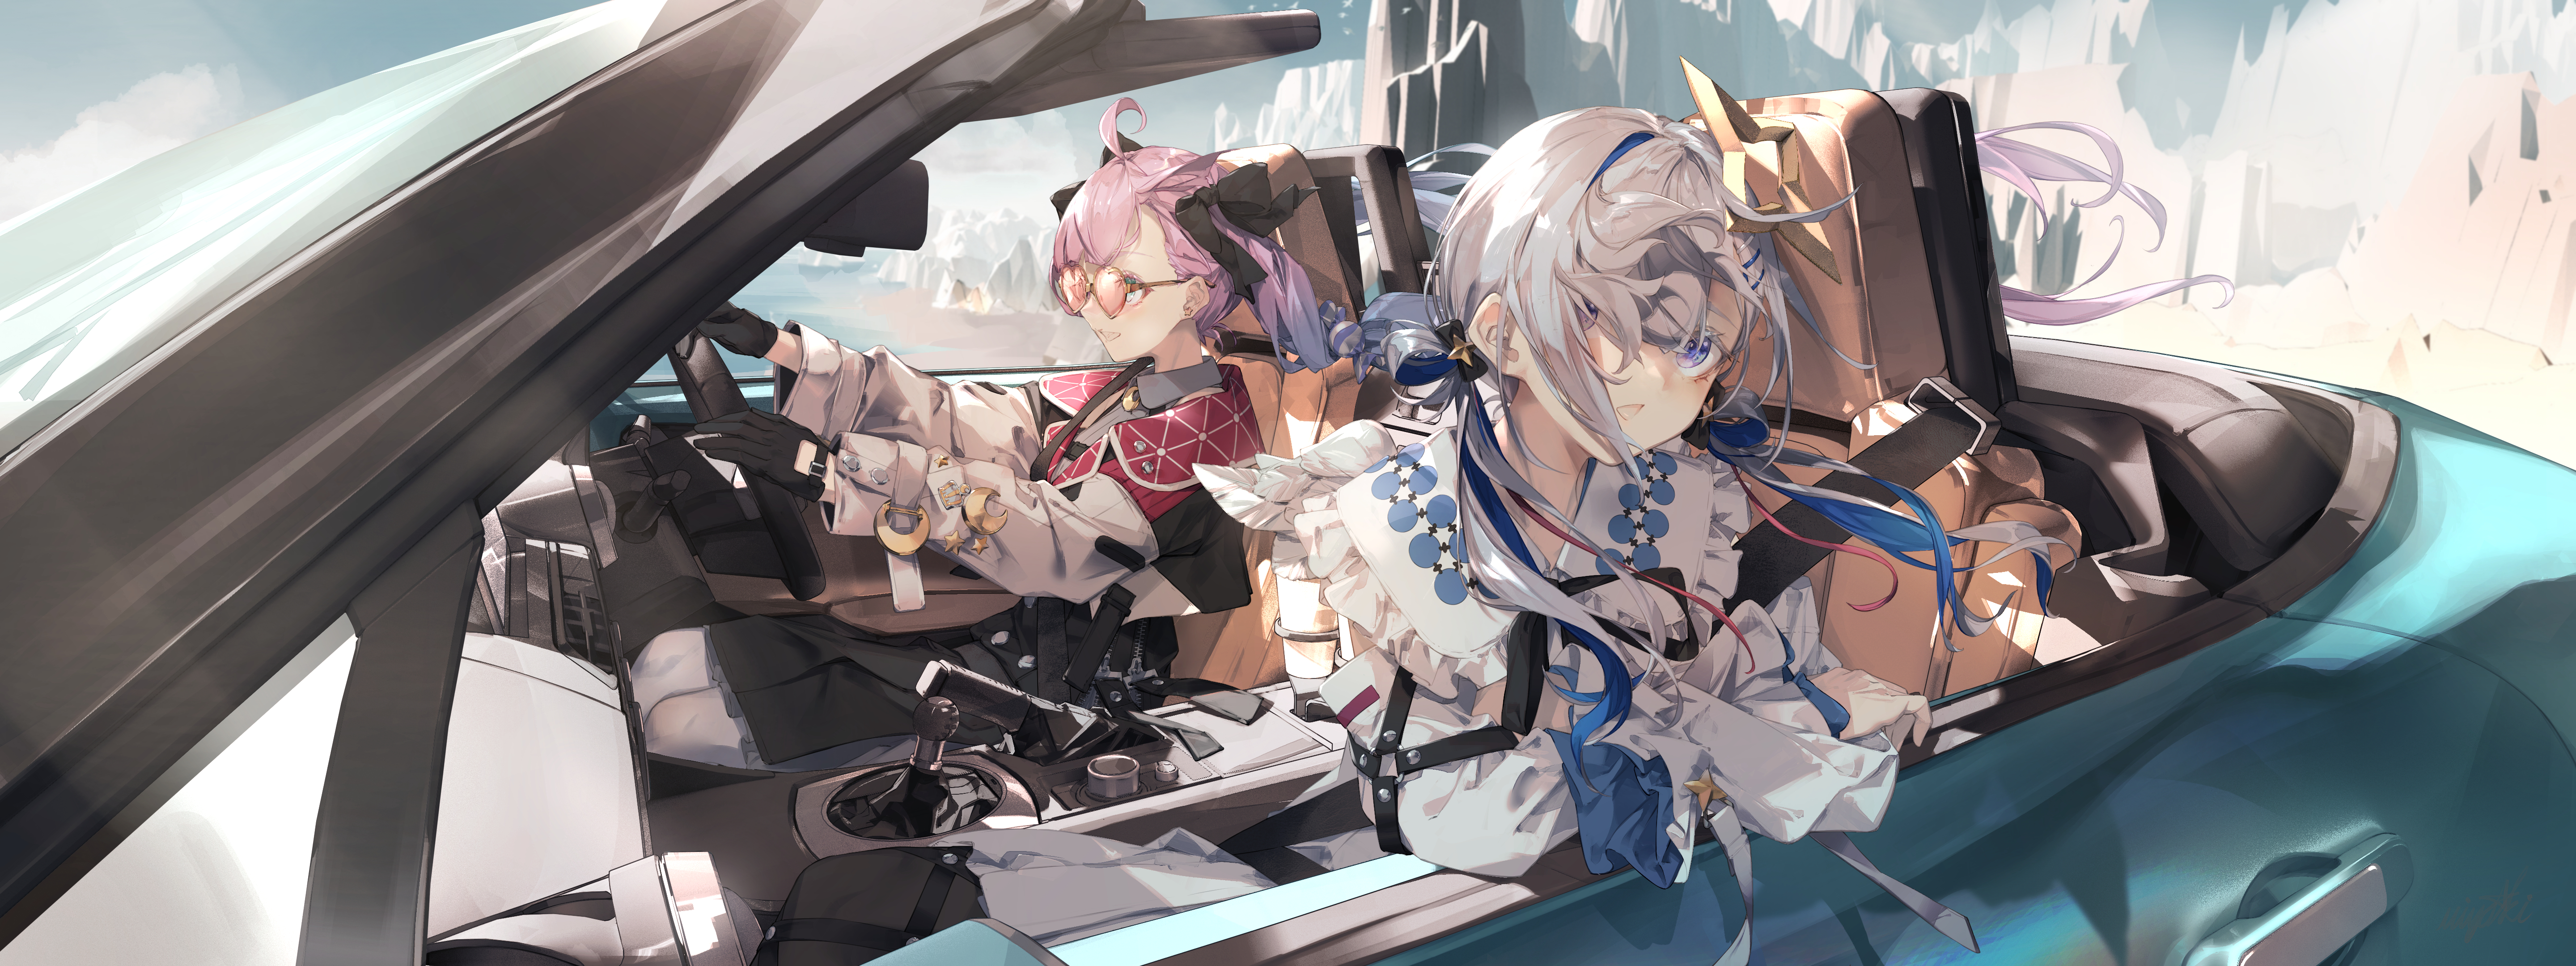 Anime 5760x2160 anime anime girls car vehicle driving gloves long hair hair blowing in the wind looking away car interior